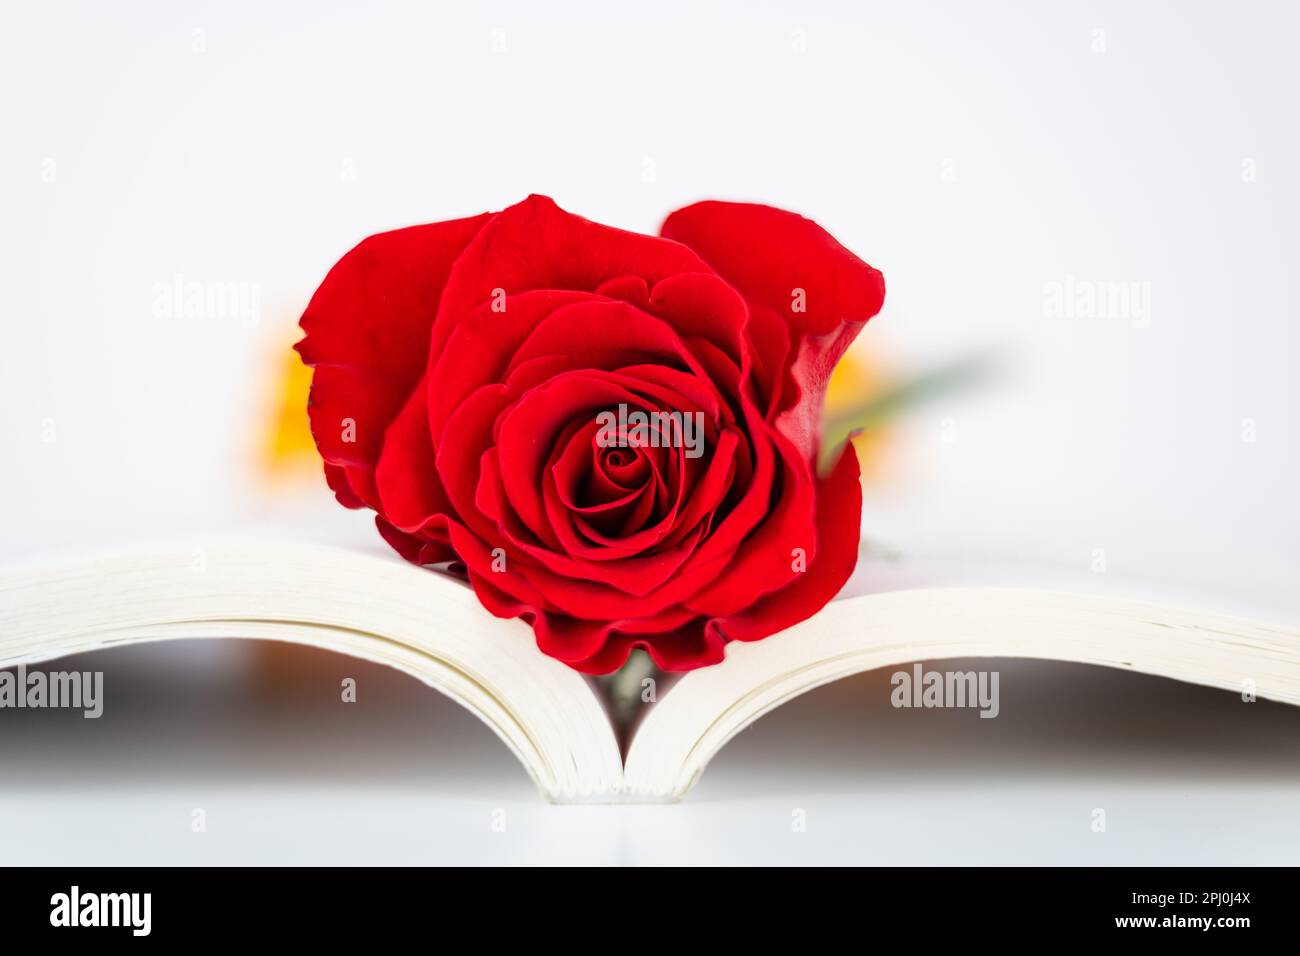 Close up red rose and ear of wheat in an opened book for Diada de Sant Jordi. Tradition of St Jordi Day in Catalonia. Catalan book and rose flower day Stock Photo